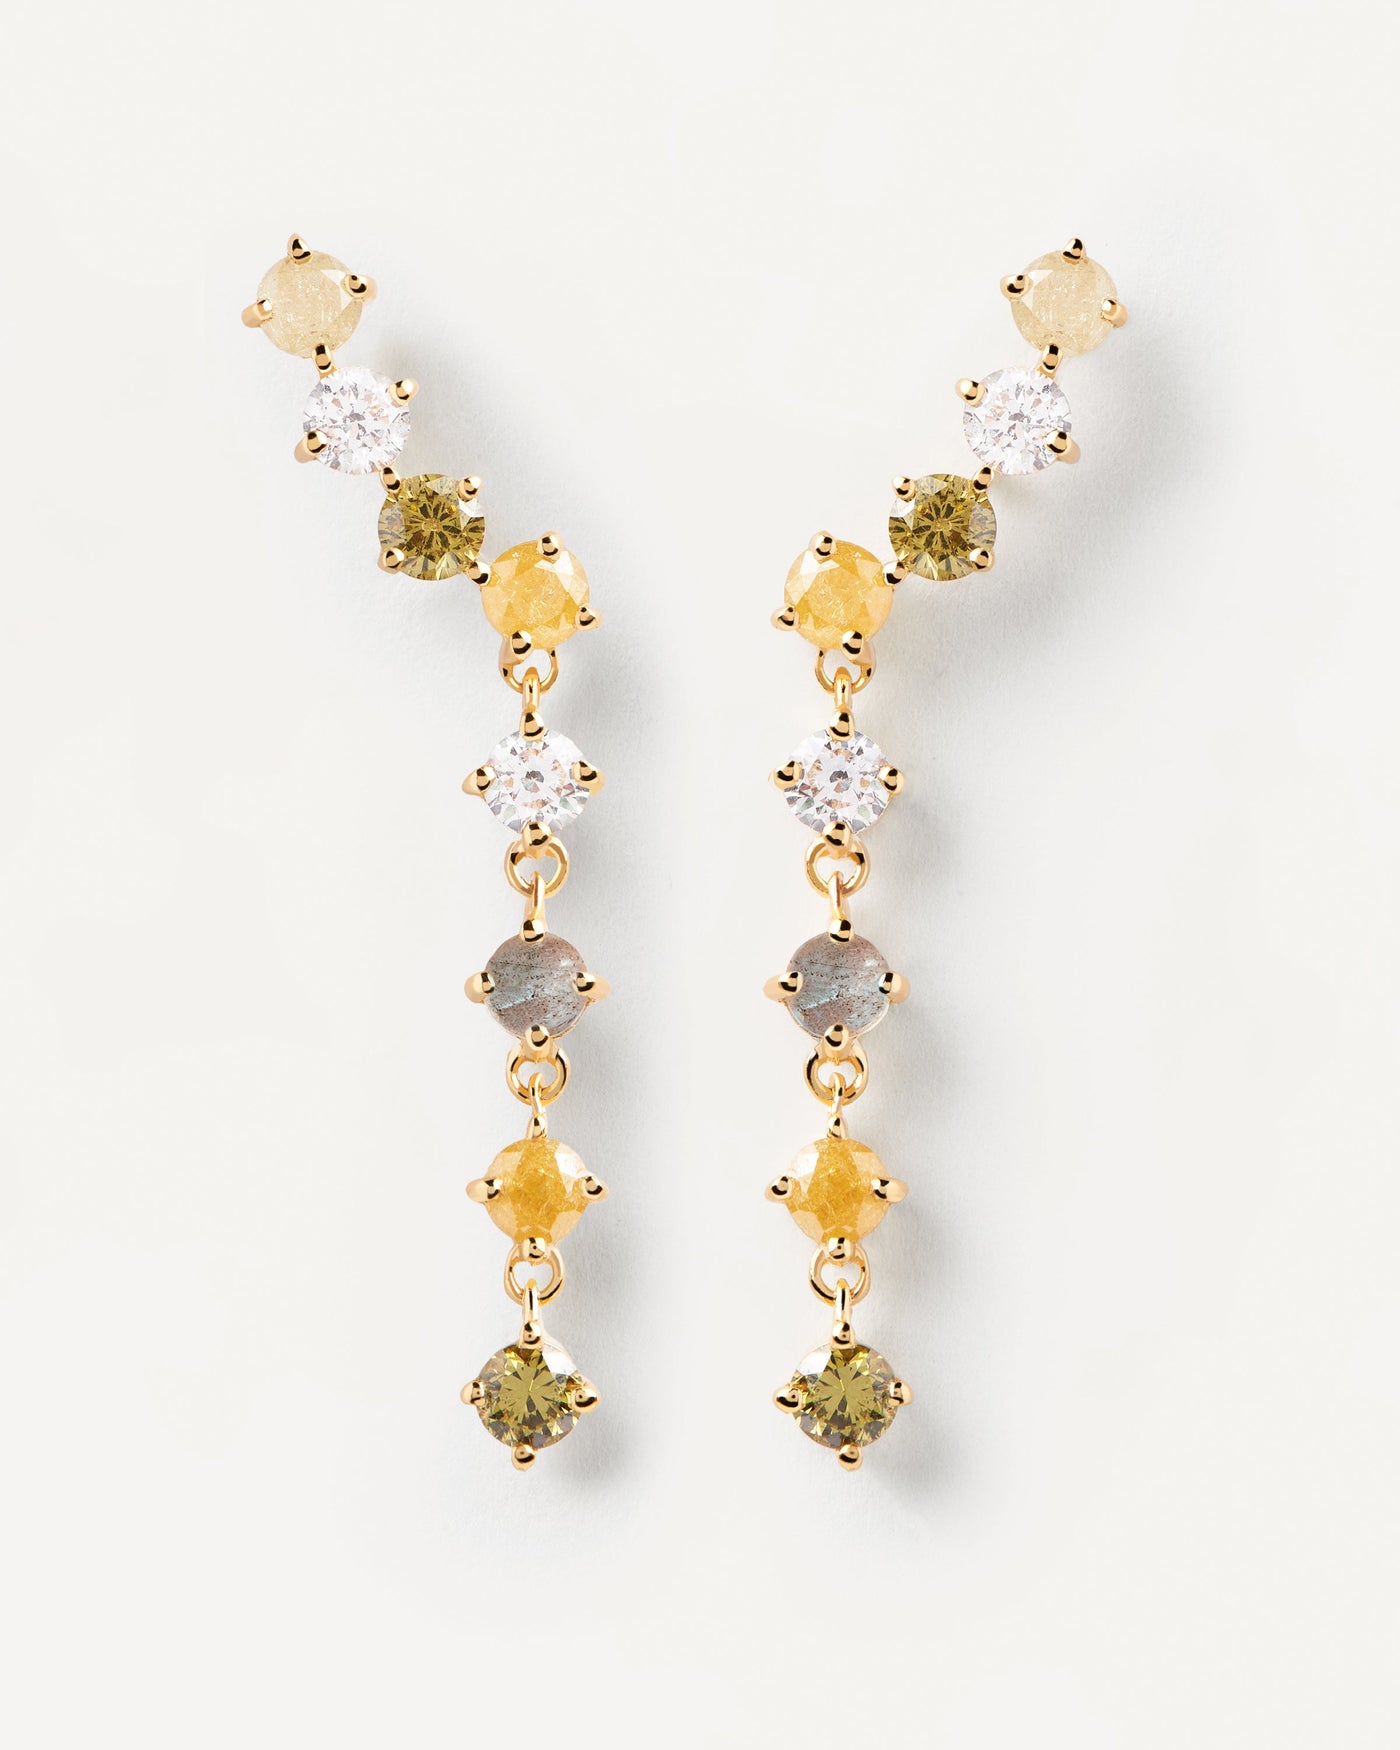 2023 Selection | Panorama Earrings. Gold-plated long earrings with green gemstones. Get the latest arrival from PDPAOLA. Place your order safely and get this Best Seller. Free Shipping.